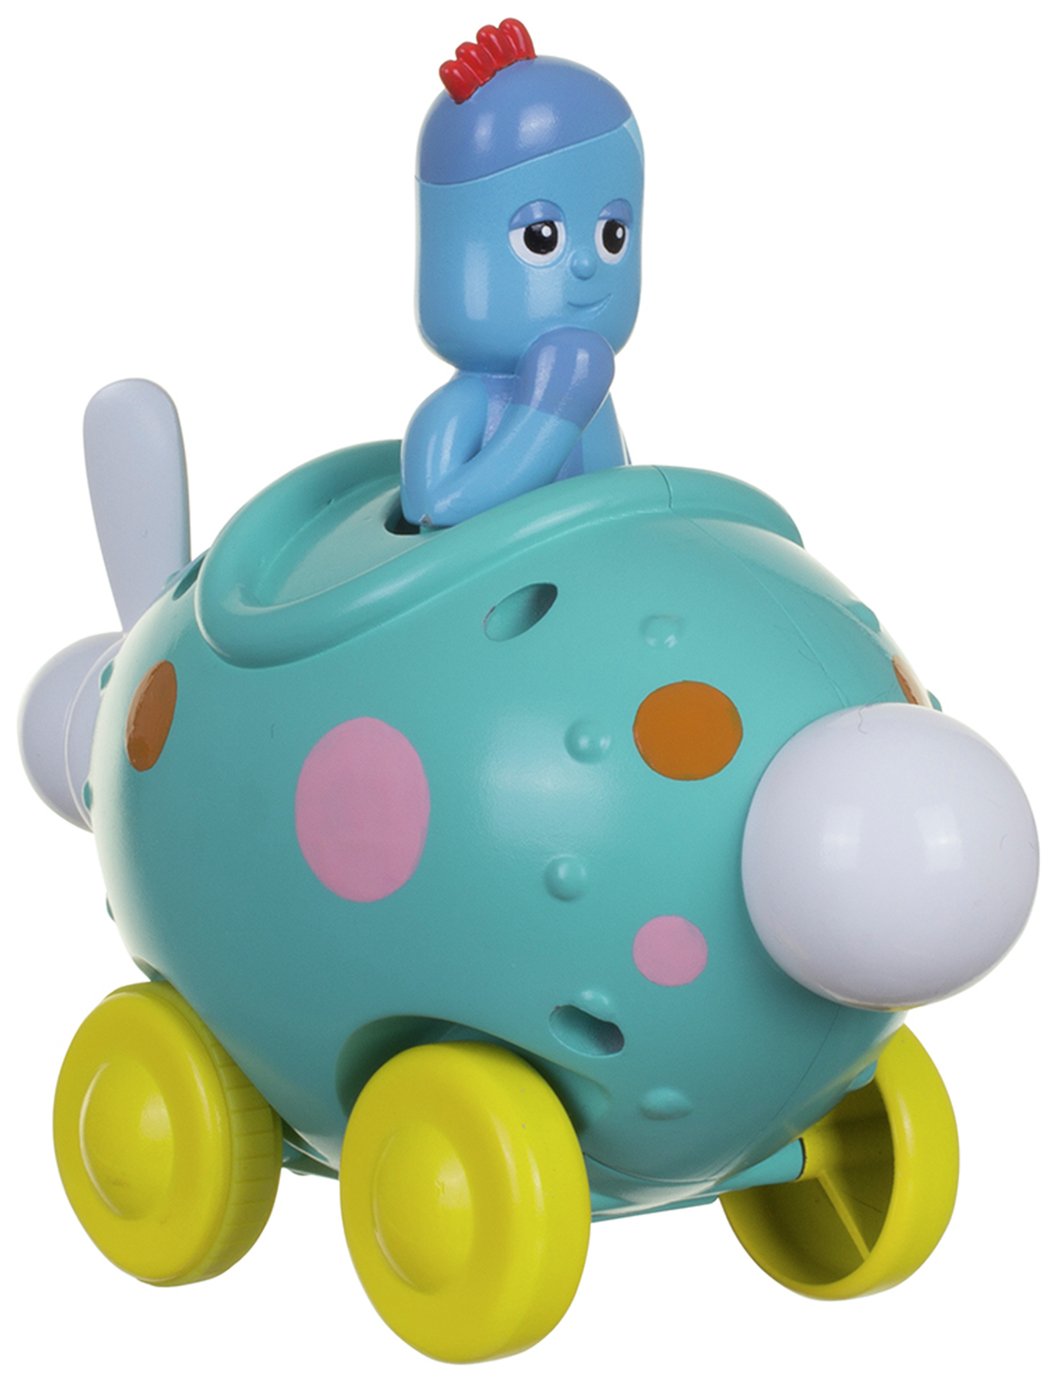 In The Night Garden Press and Go Vehicles Assortment